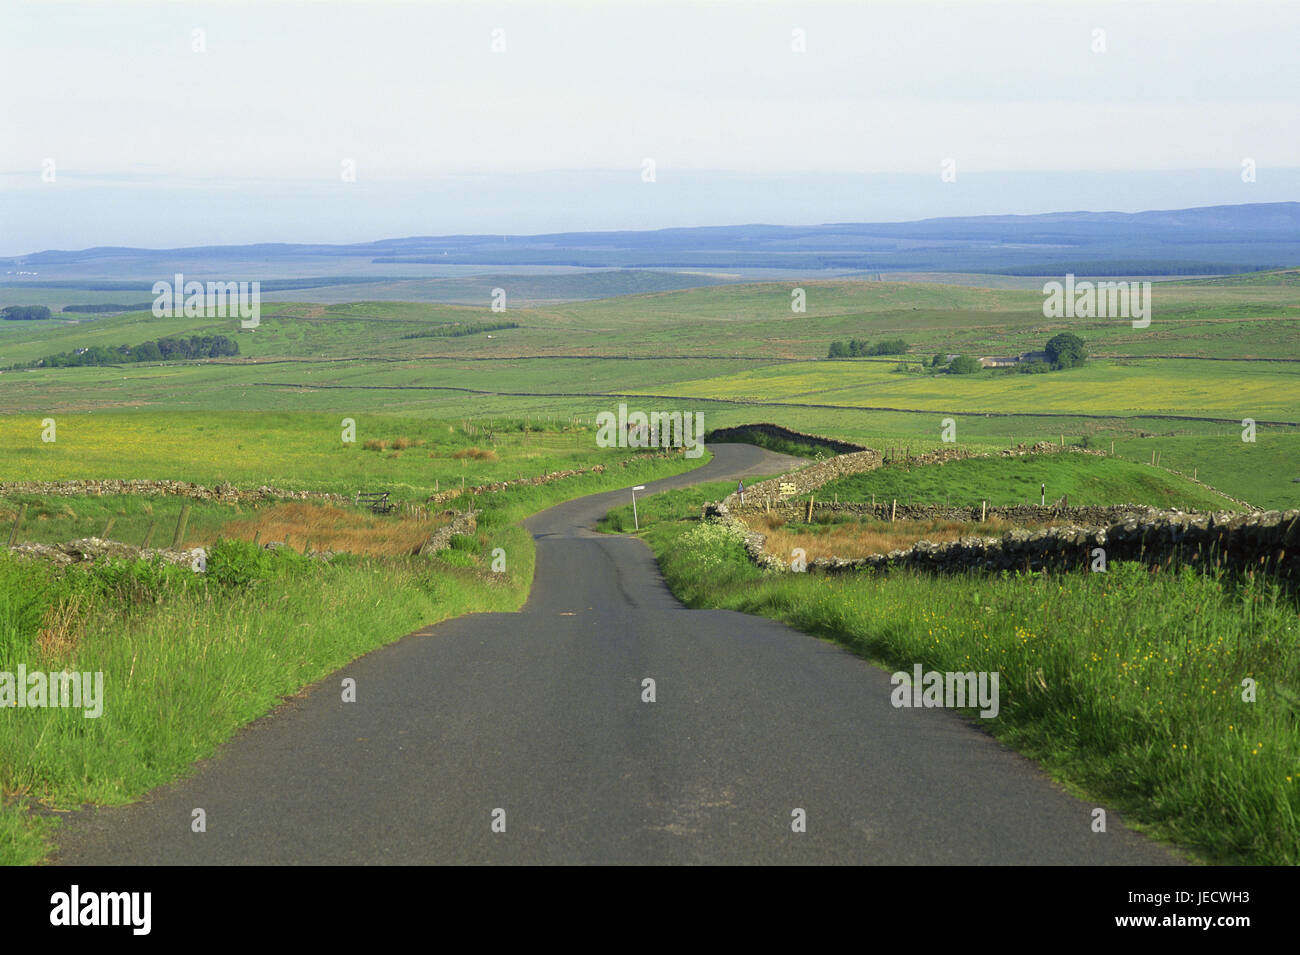 Great Britain, England, Northumbria, scenery, street, blank, Europe, Northumberland, width, distance, view, meadows, fields, hills, morning, atmospheric, deserted, remotely, country road, Stock Photo